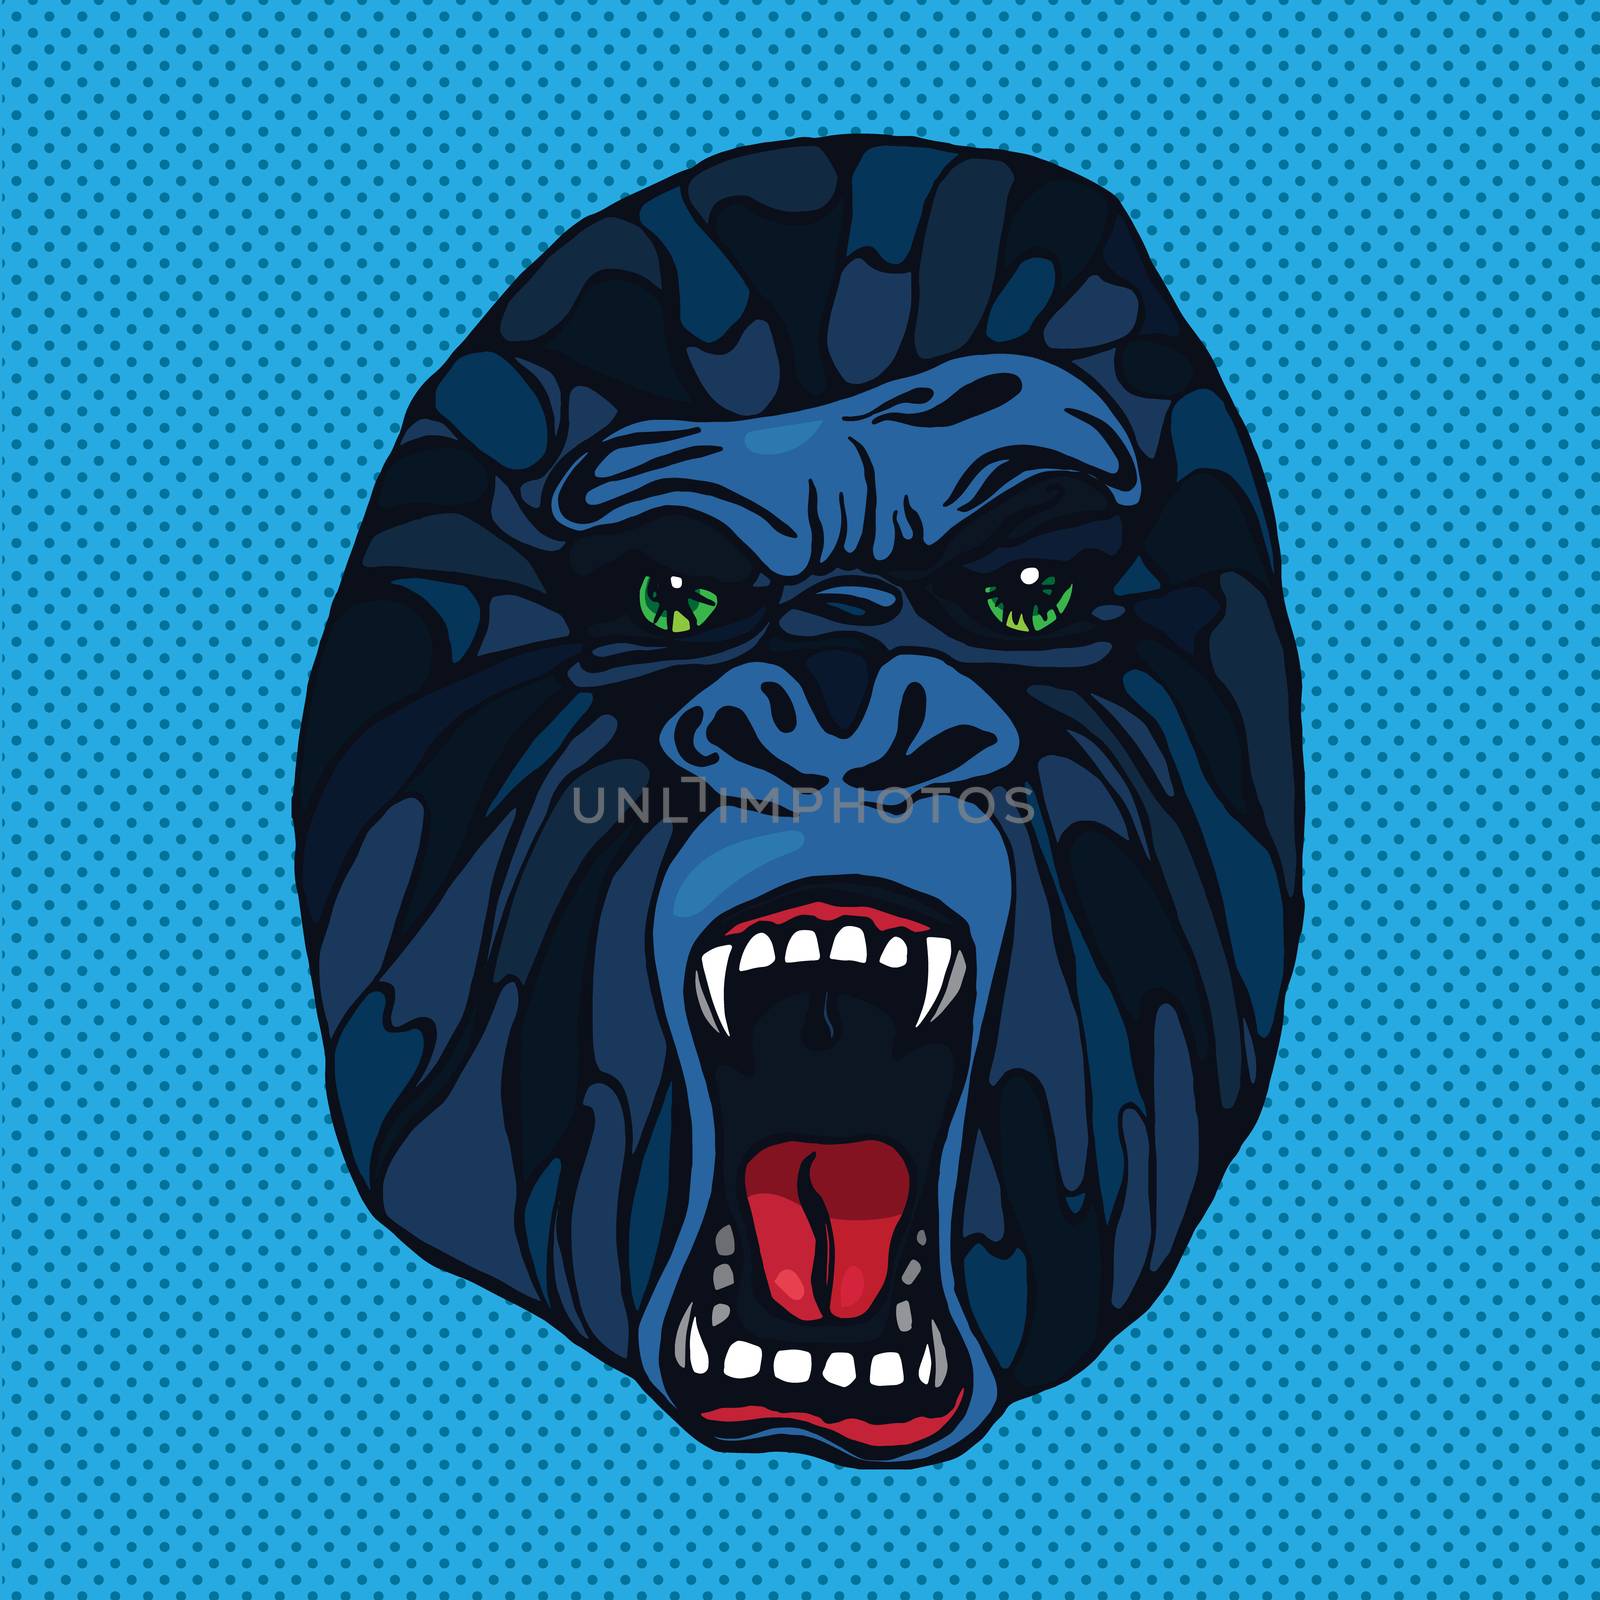 Growling detailed gorilla in pop art style. Design for t-shirt, poster, bag. Vector